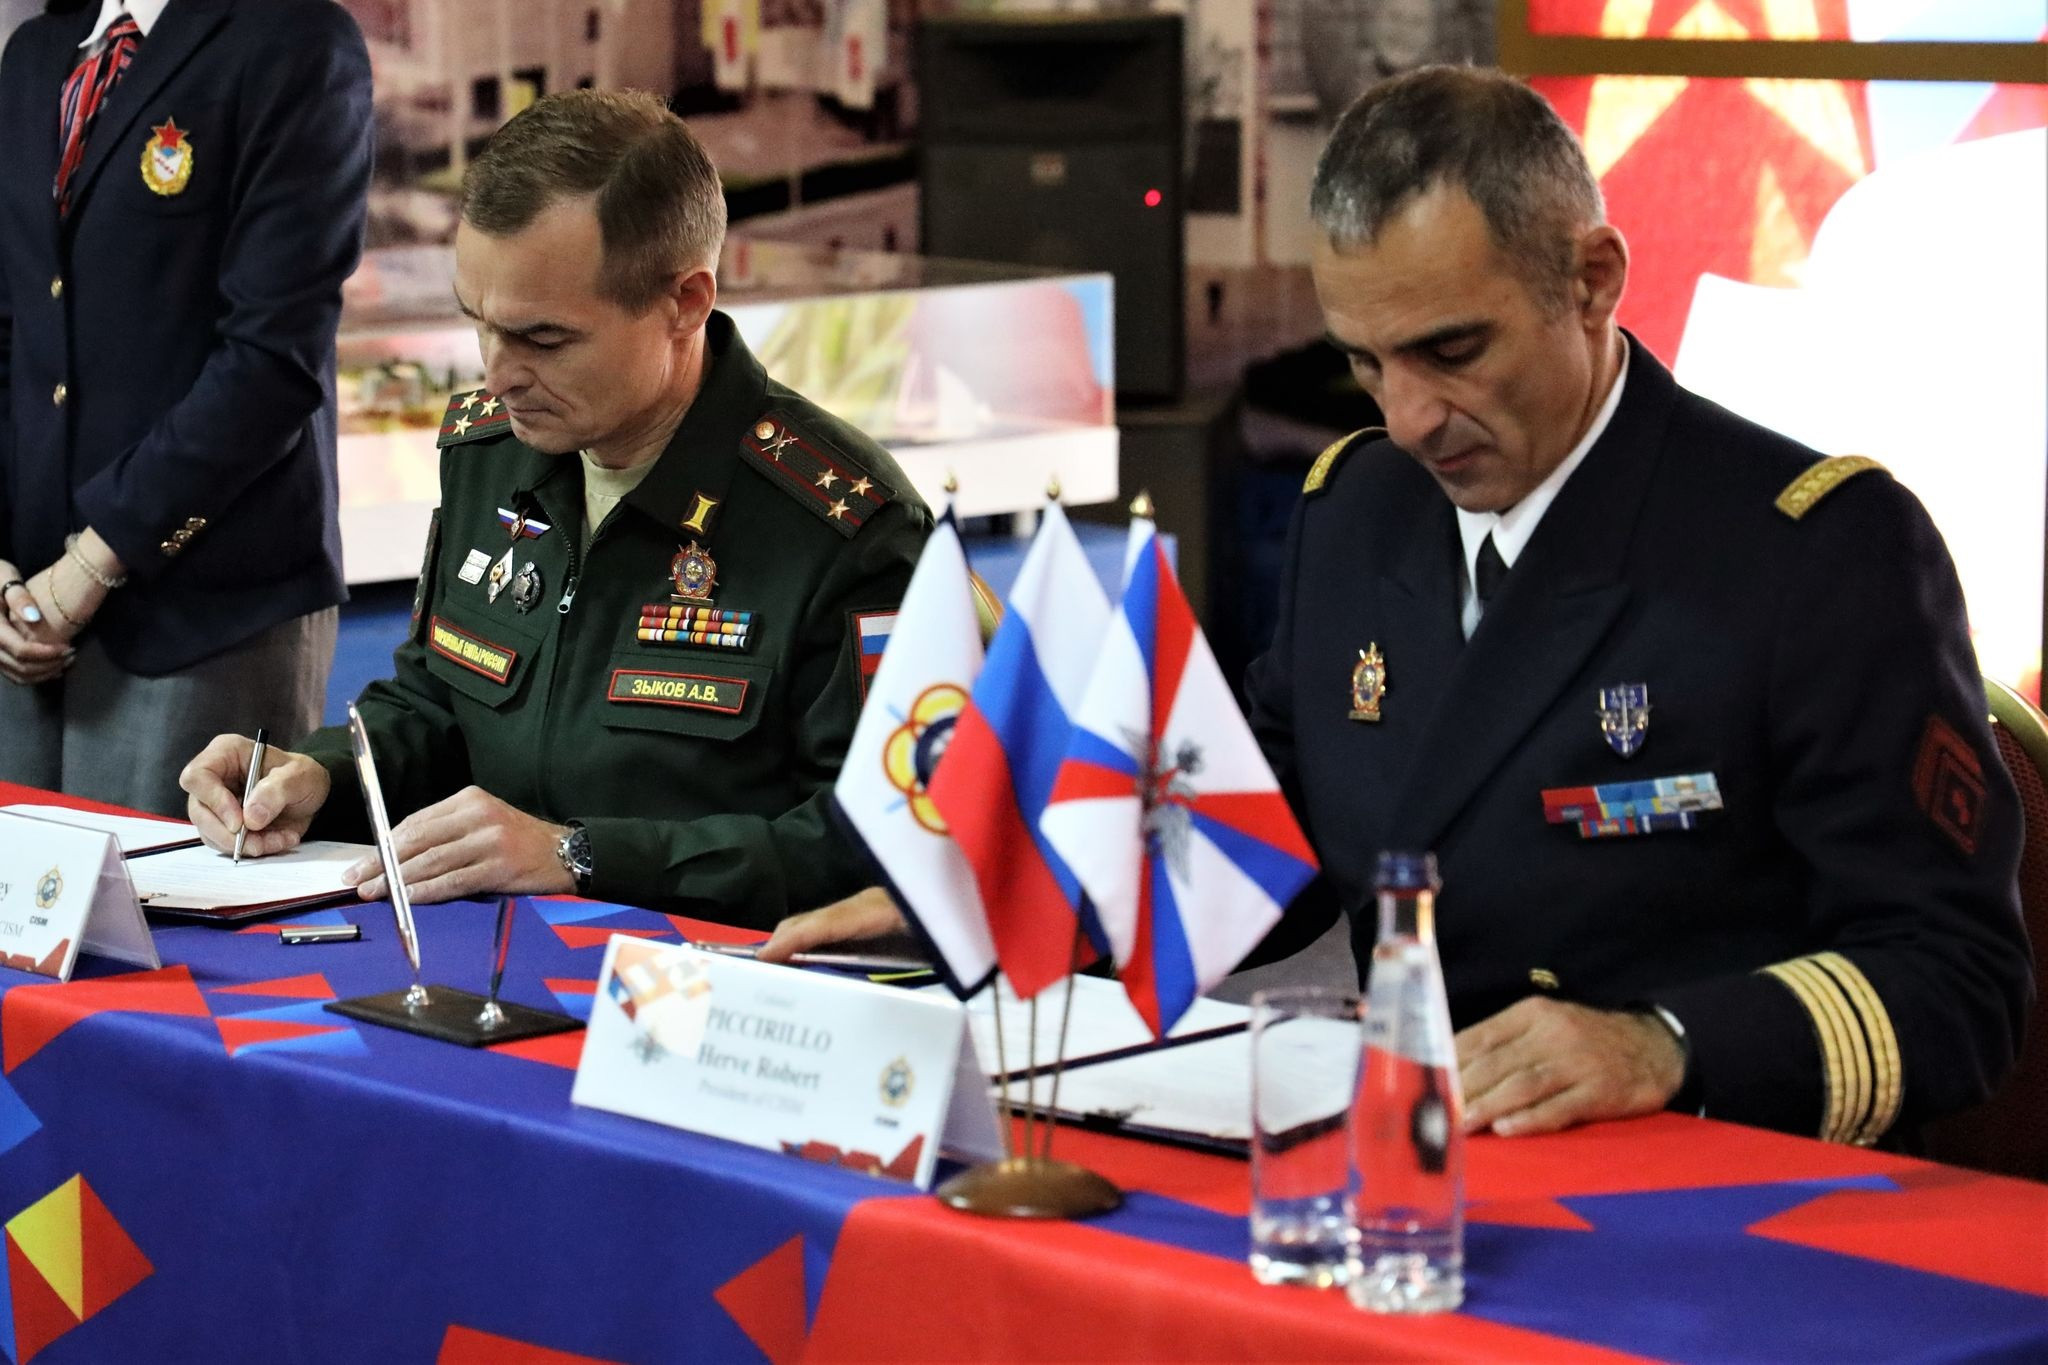 The International Military Sports Council signed an agreement in 2019 for Russia to host the 2022 World Cadet Games ©CISM